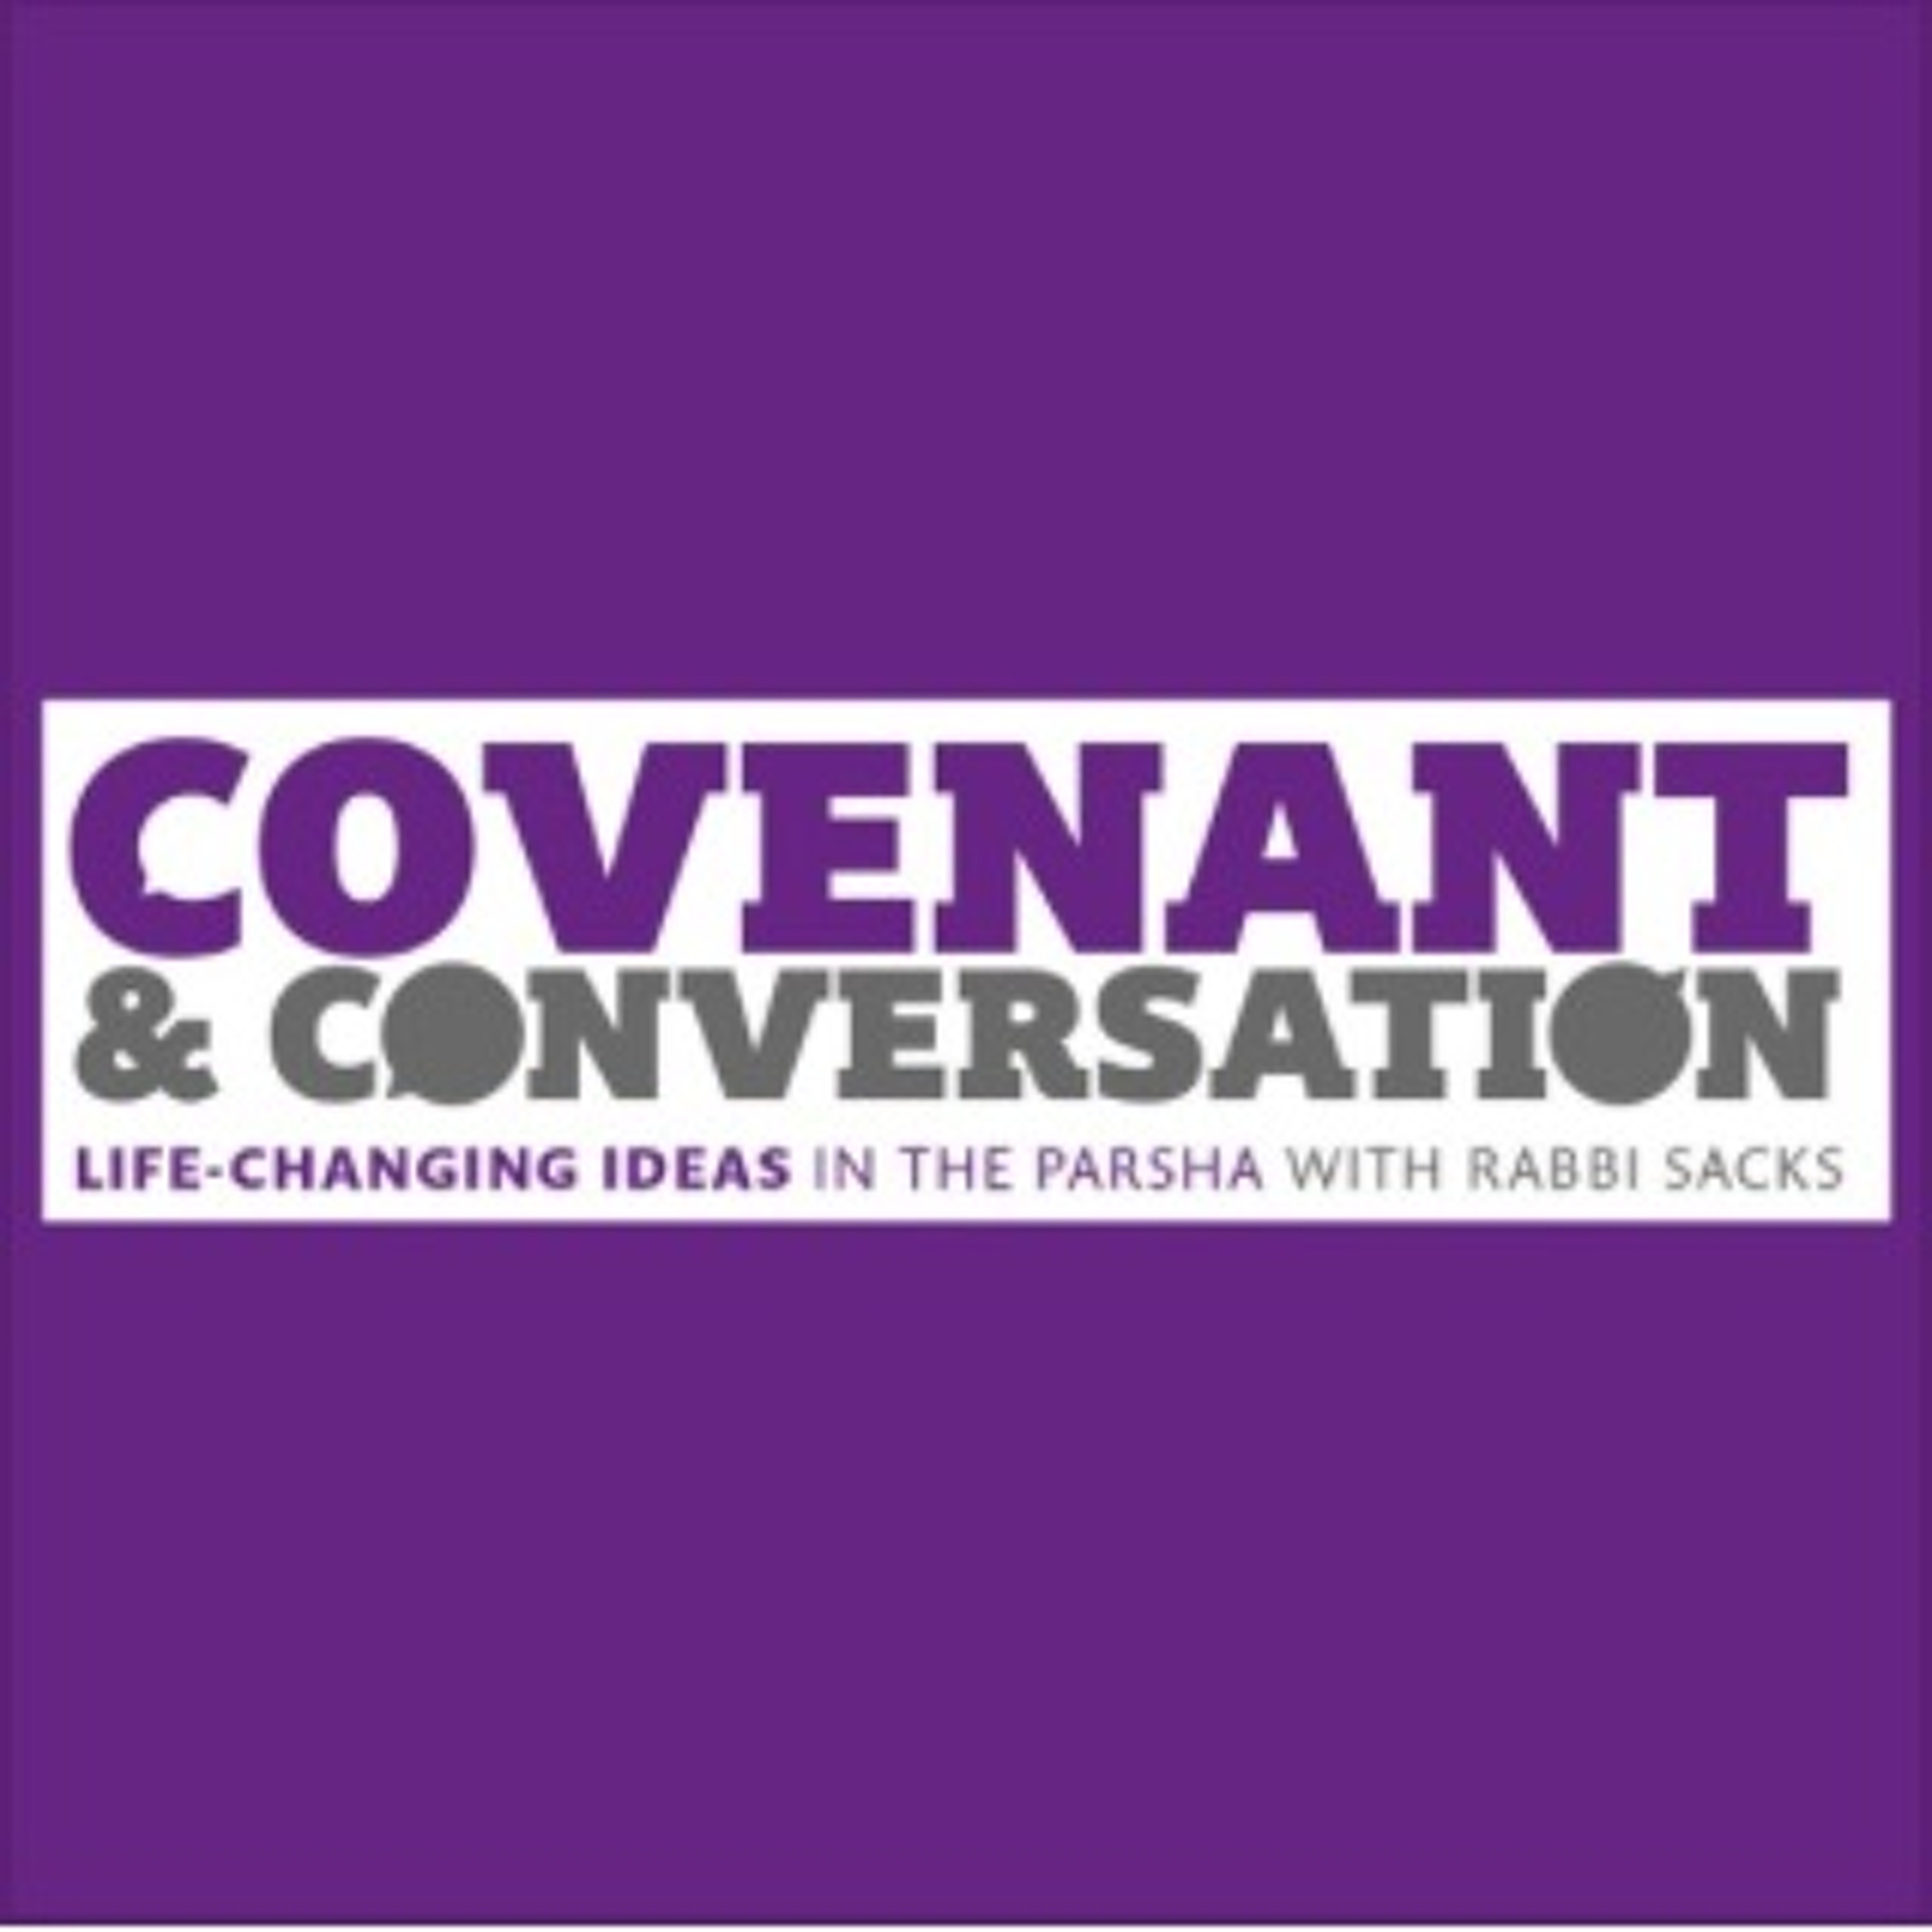 ”The Call” | Vayikra, Covenant & Conversation 5778